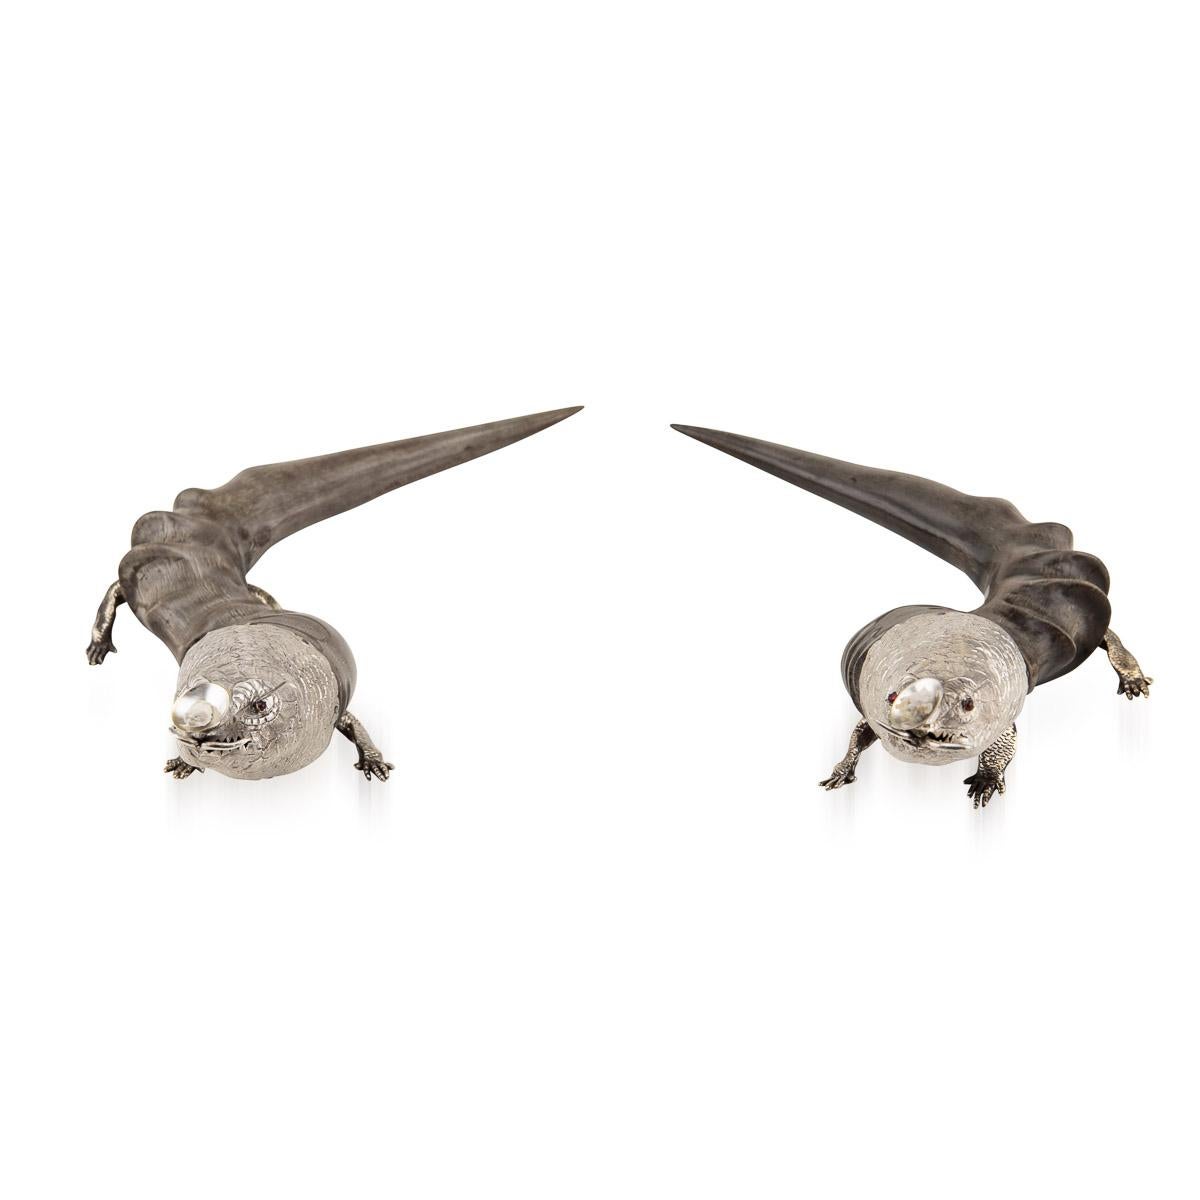 20th Century Edwardian Solid Silver & Horn Lizard Shaped Cigar Lighters, C.1900 For Sale 2